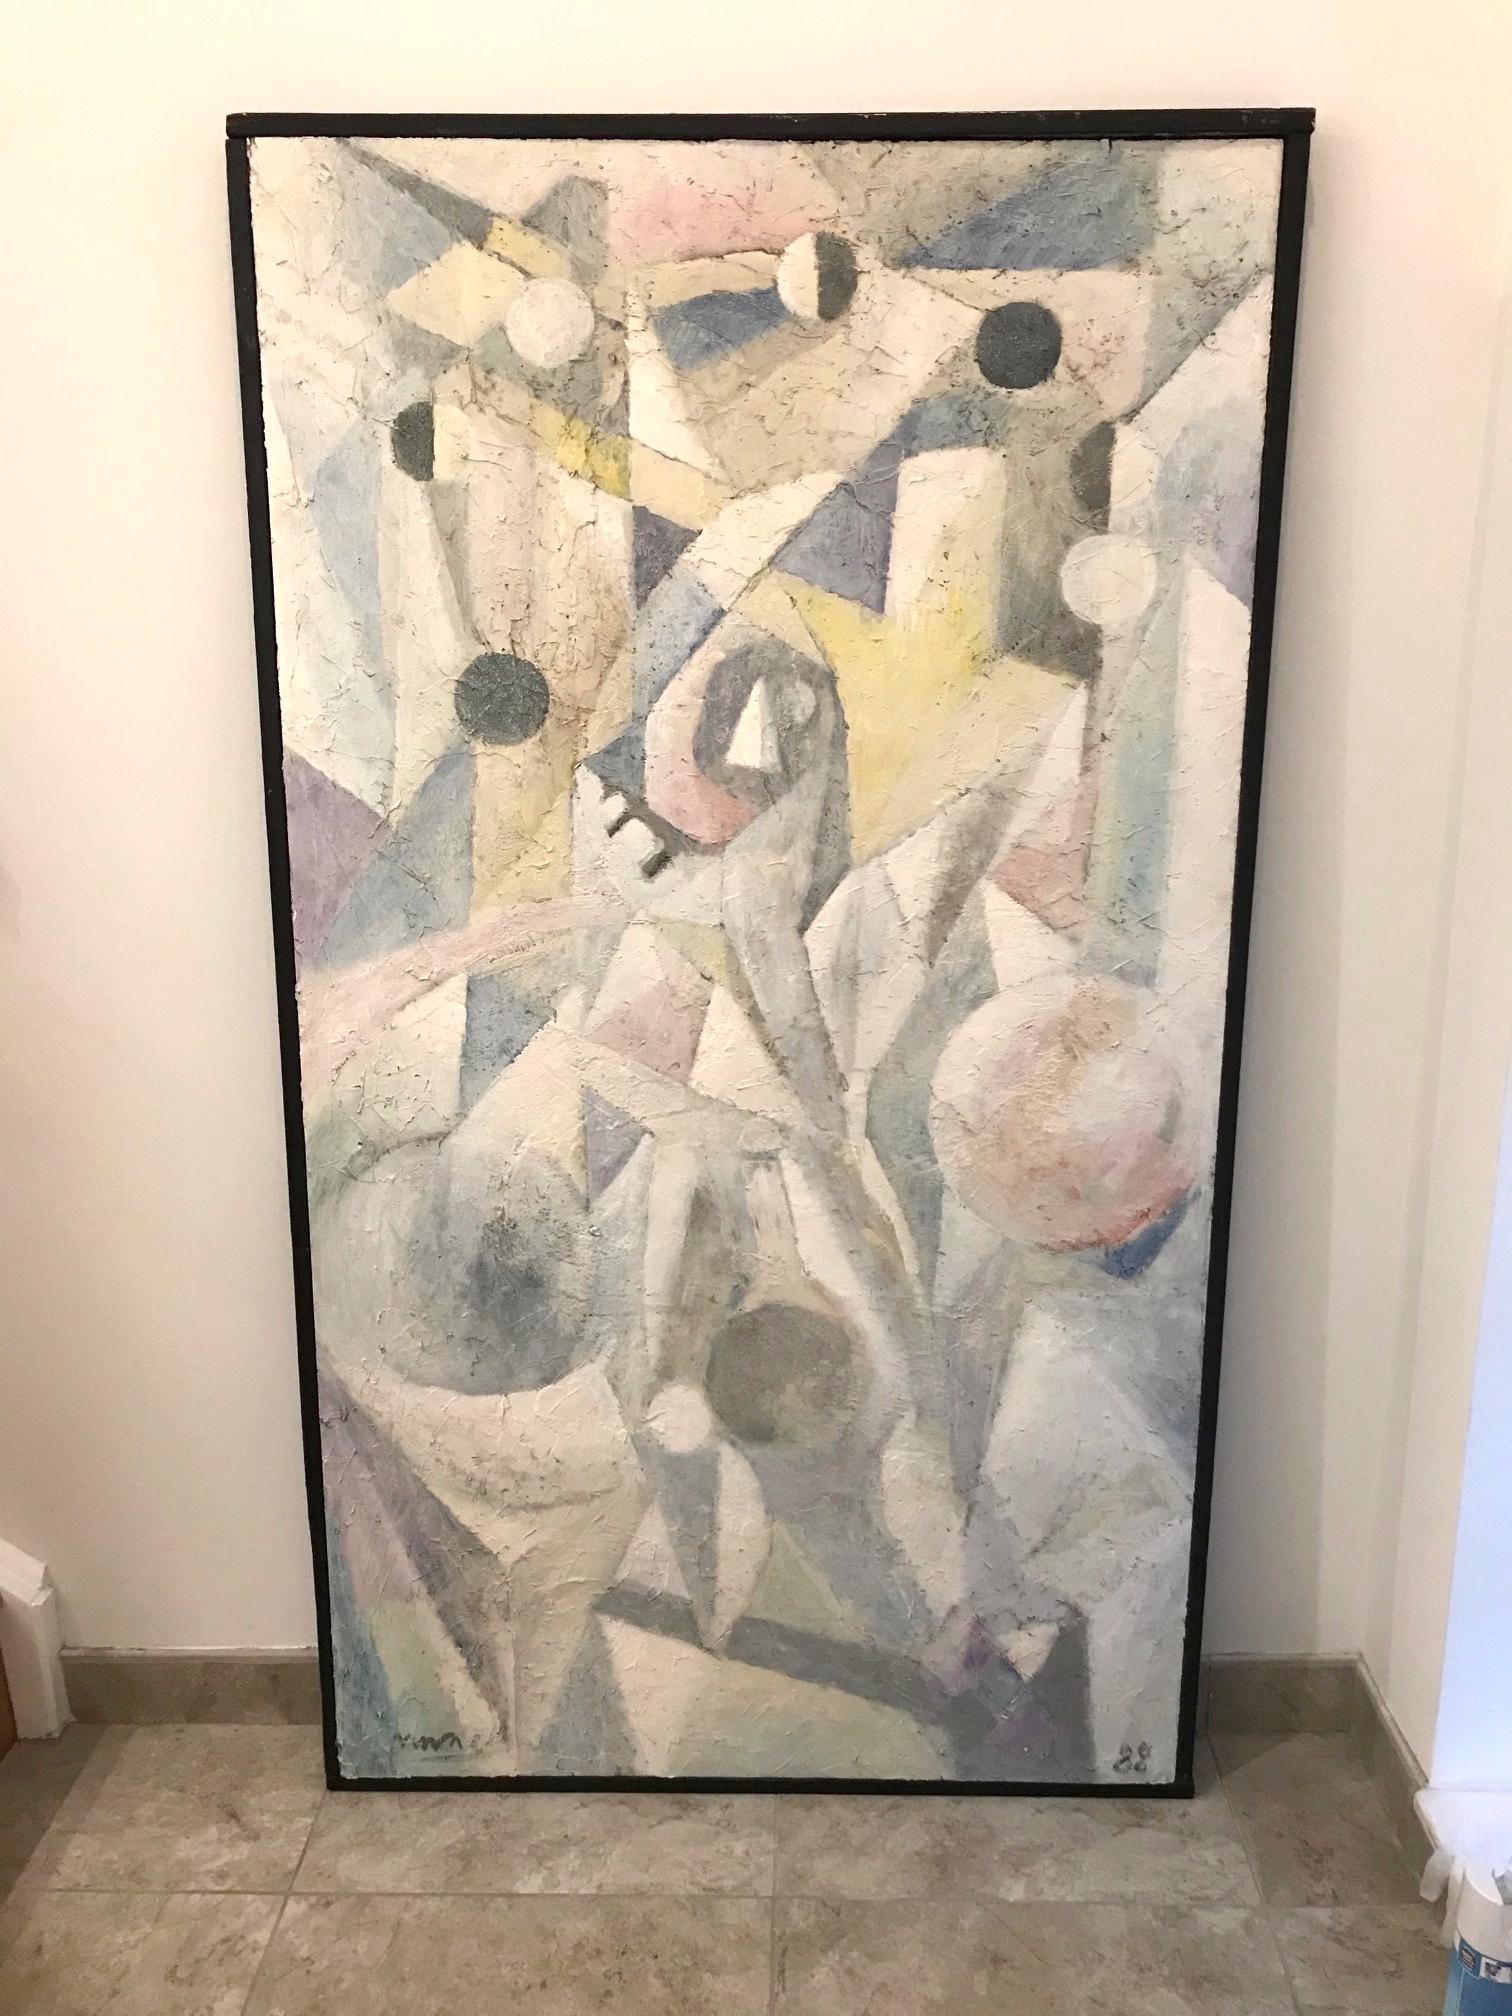 Cubo-Futurism Abstract Painting in Pastel Colors, Fresco on Board, c. 1988 For Sale 1